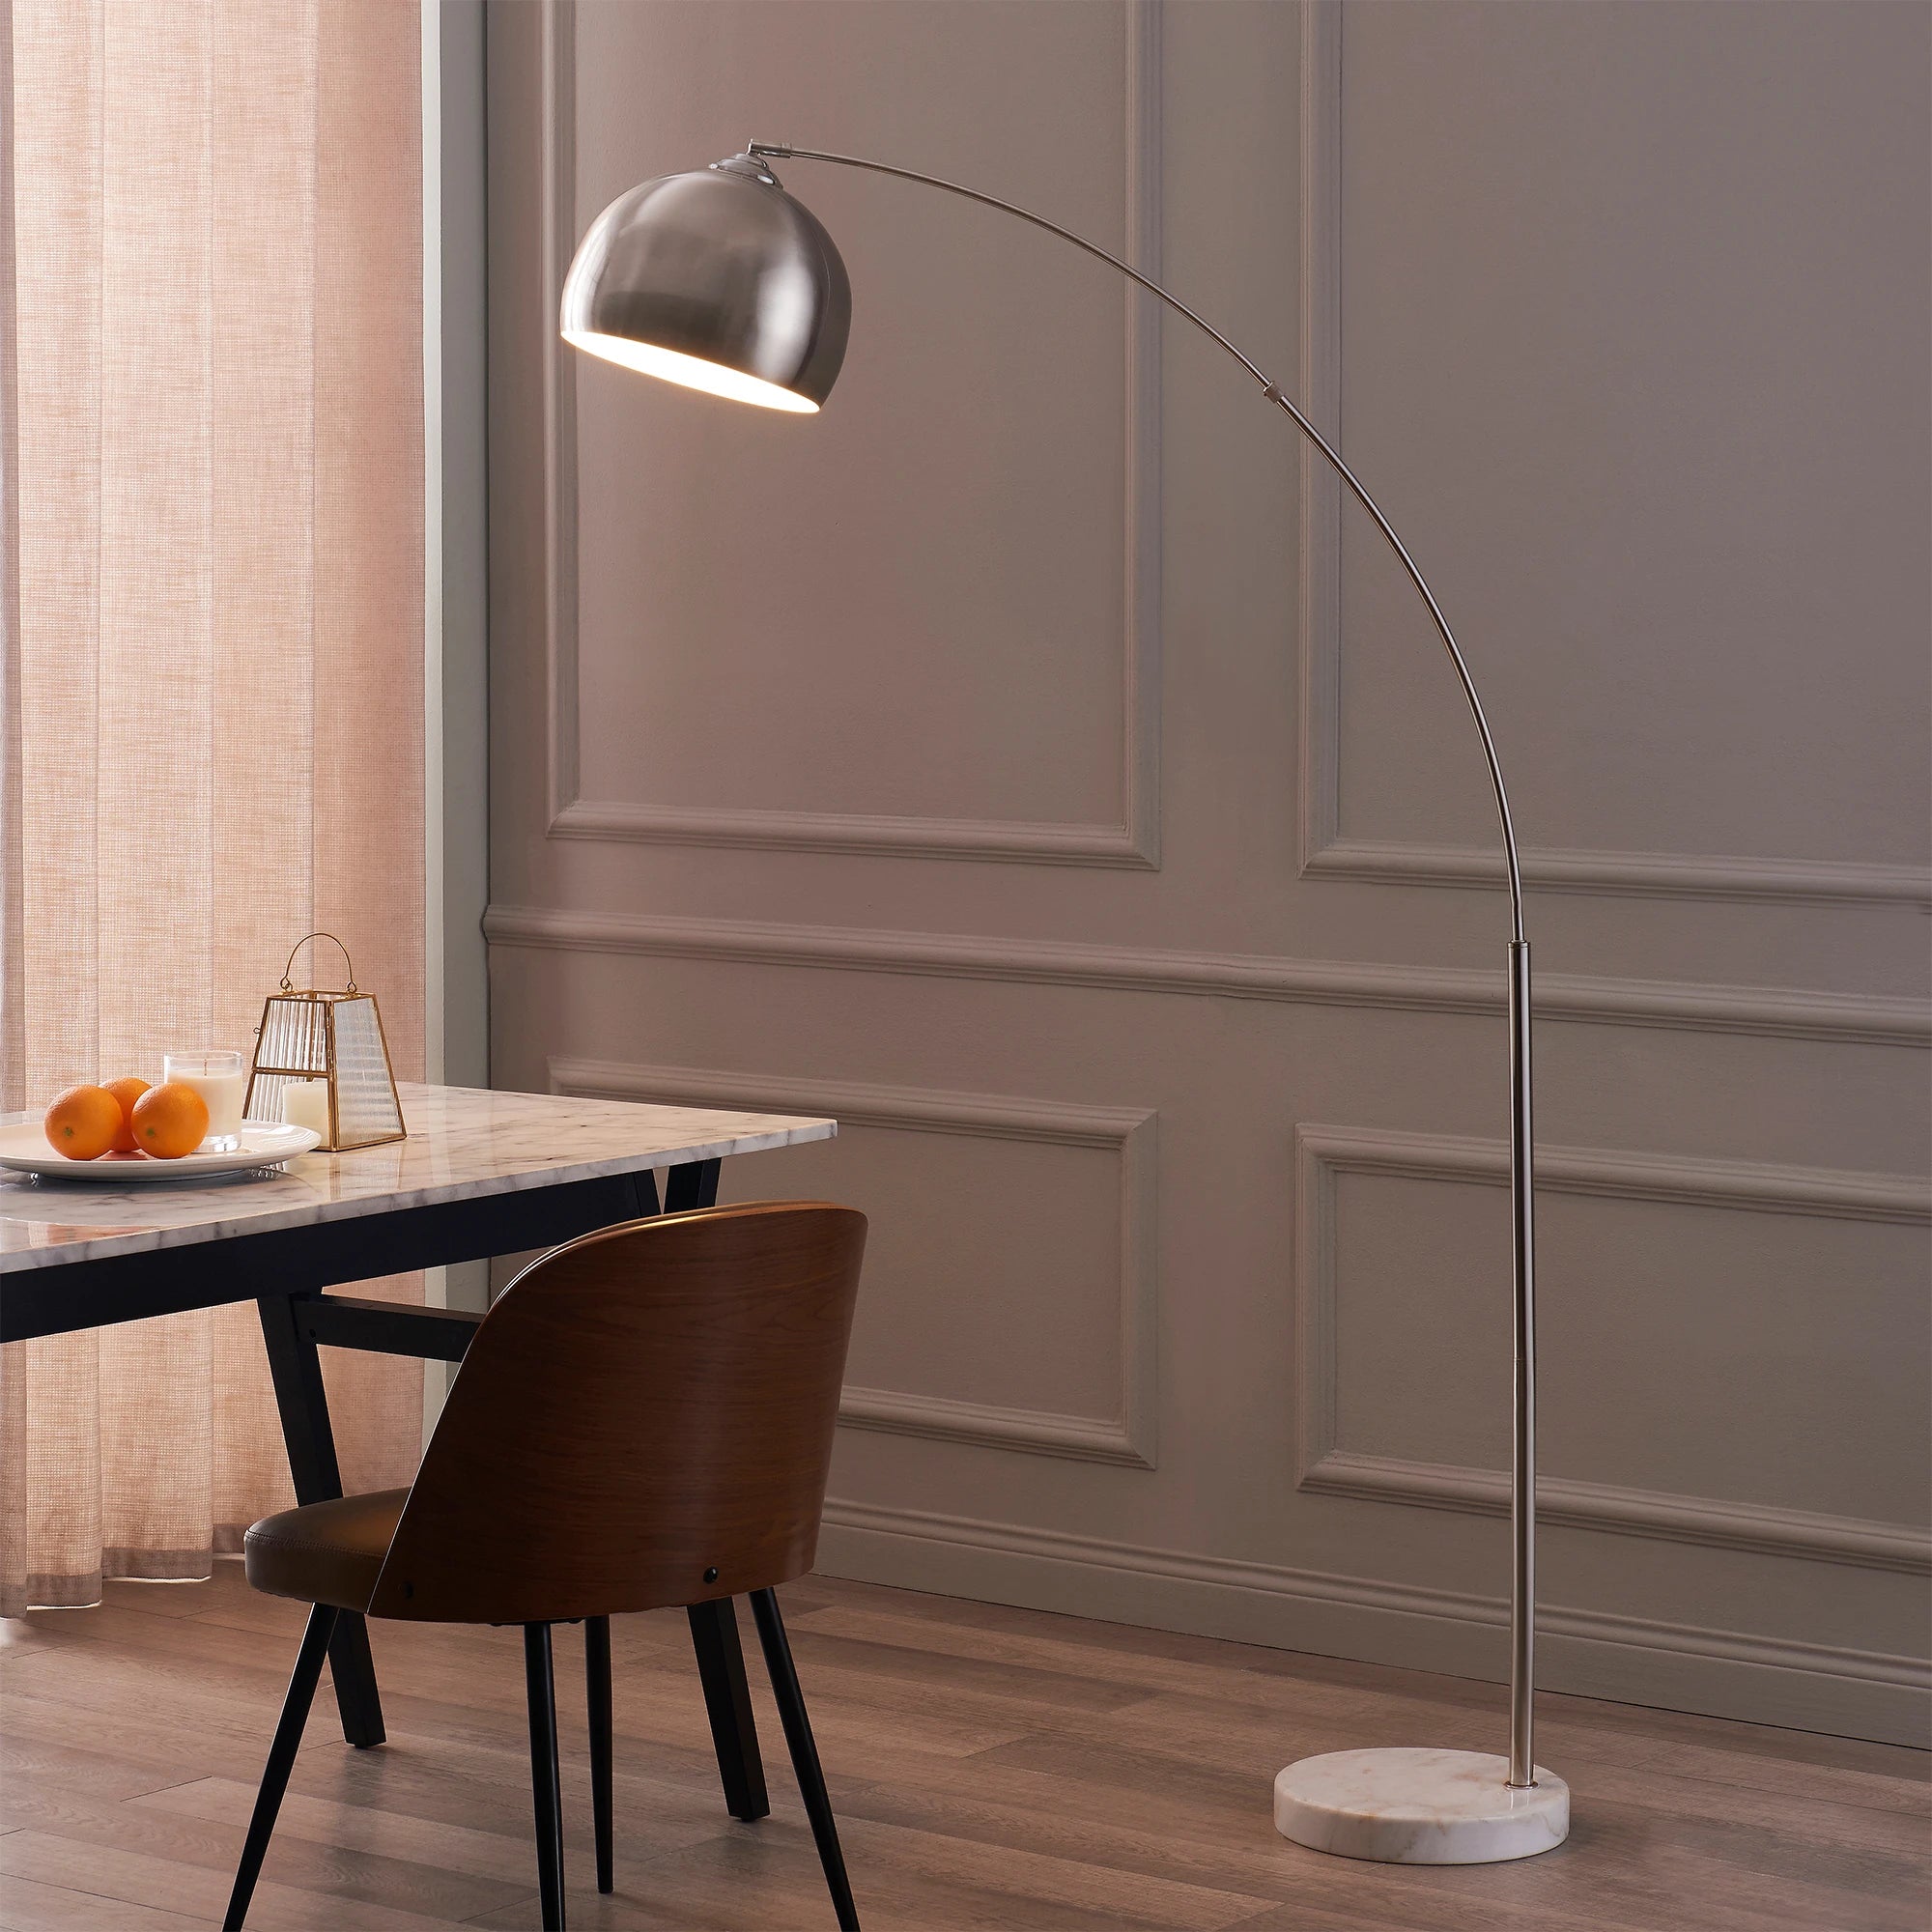 Two tripod lamps face each other, one black and one white